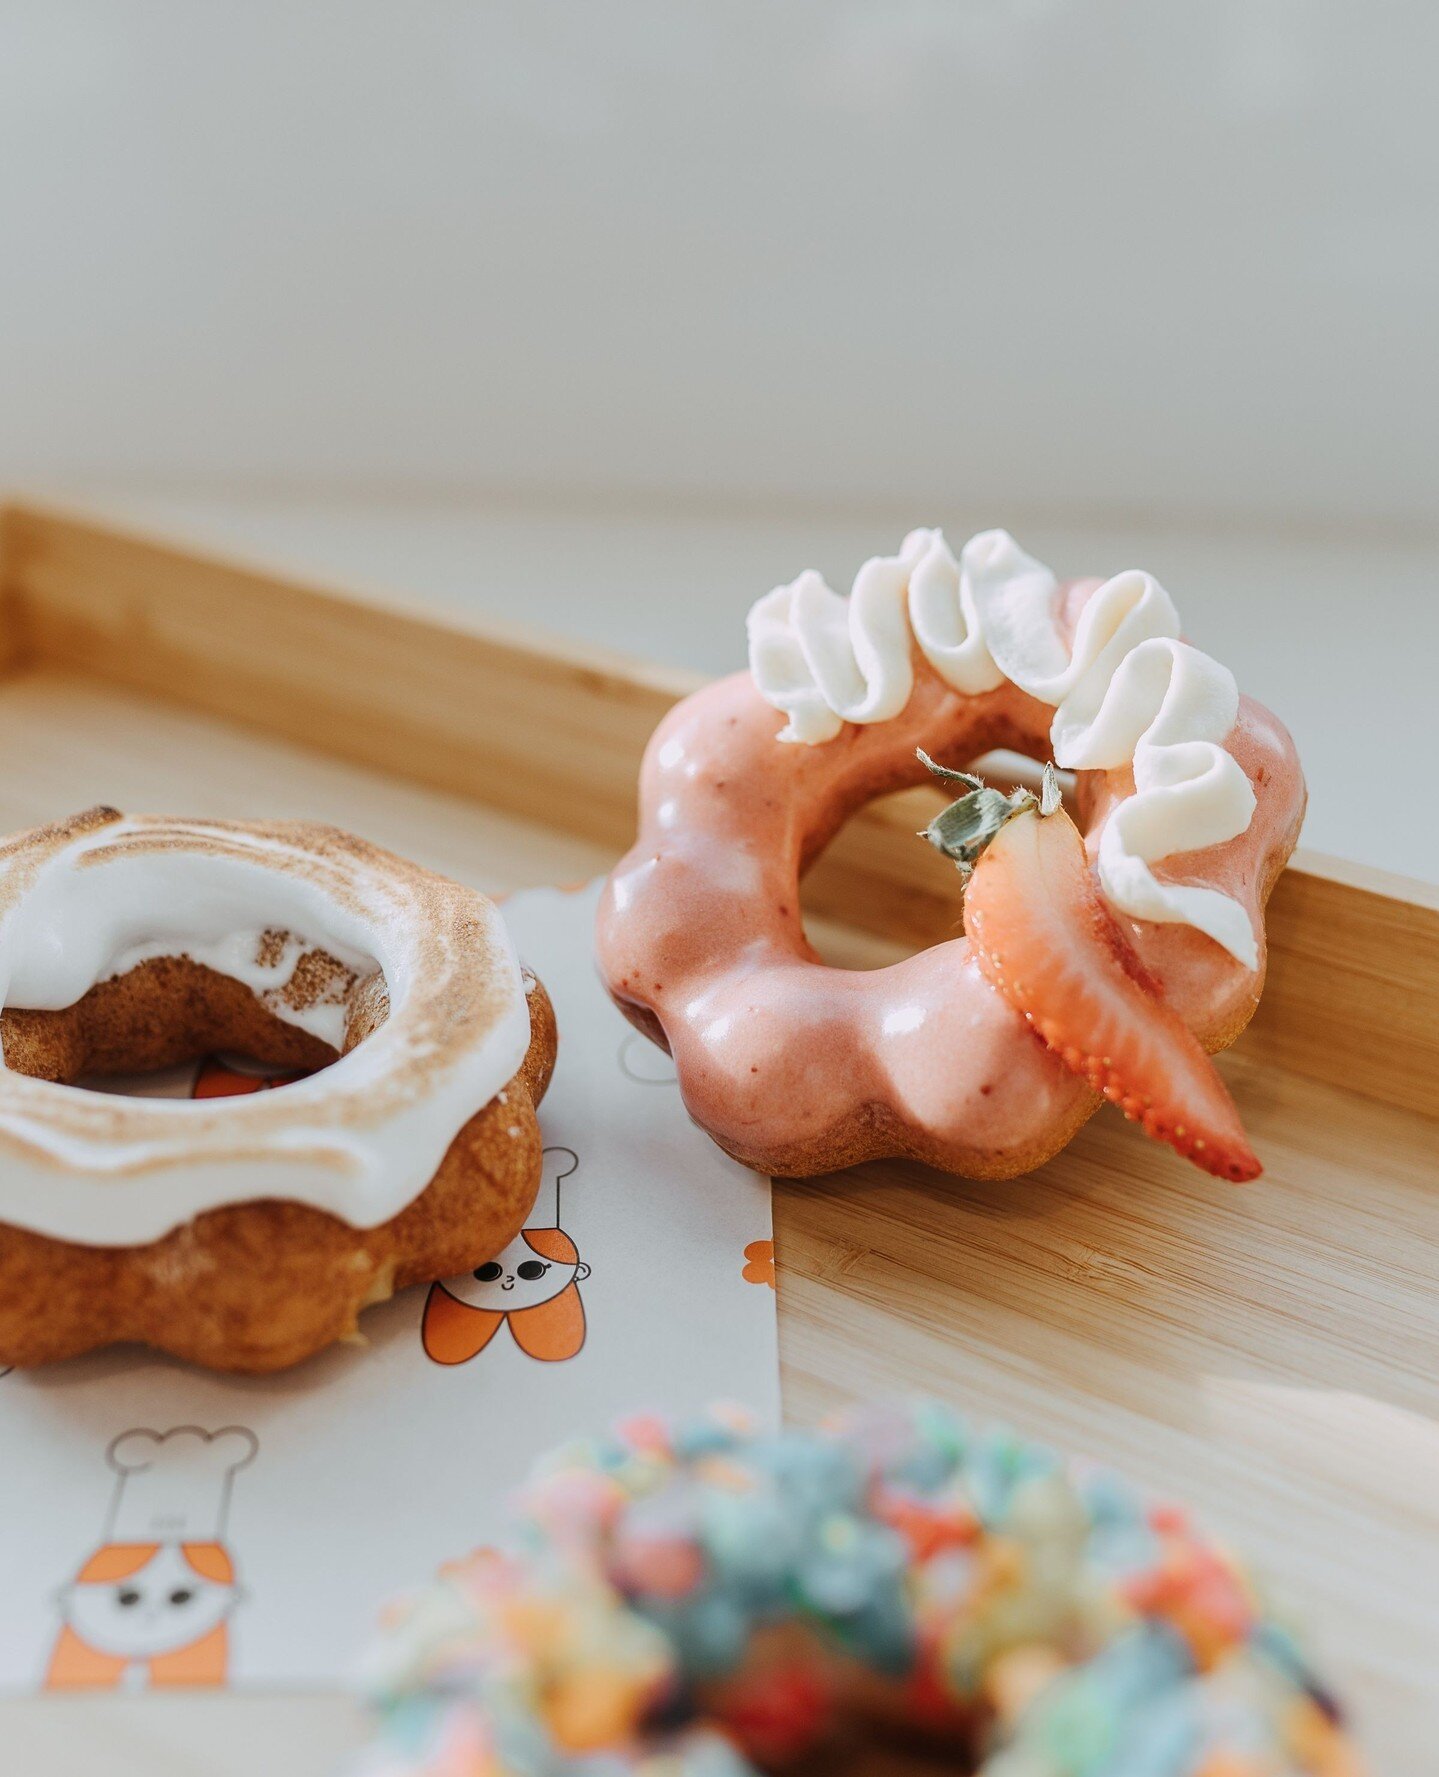 I still dream about these mochi donuts every now and then 💭⁠
.⁠
Visit either @umaidodonuts locations for a mid-week treat. It won't disappoint 🍩⁠
.⁠
.⁠
.⁠
.⁠
#manitobaphotographer #winnipegphotographer⁠
#winnipegbrandphotography #manitobabrandphoto